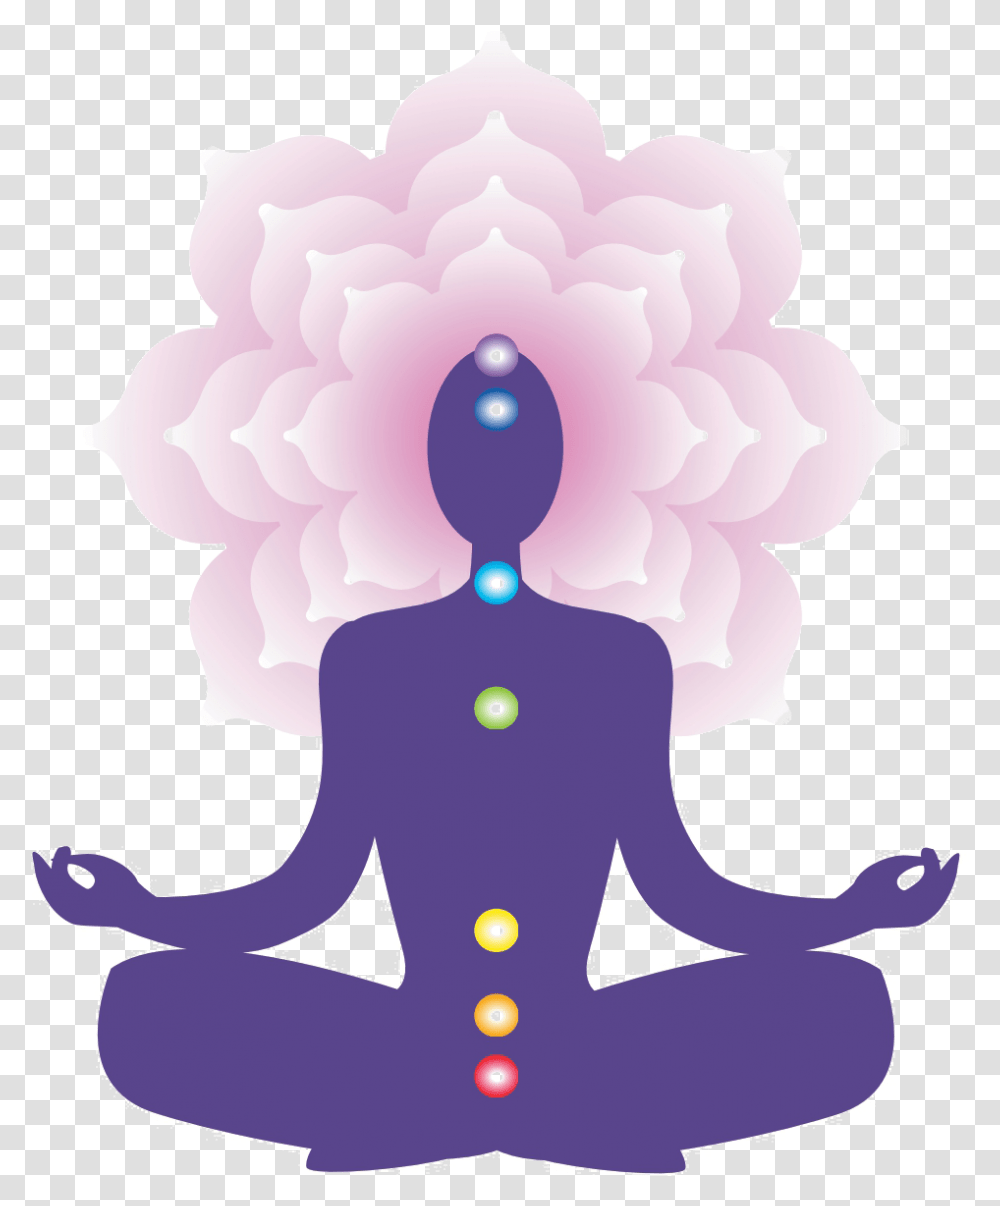 Img Classes Panchtatva In Human Body, Ornament, Snowman, Outdoors, Nature Transparent Png